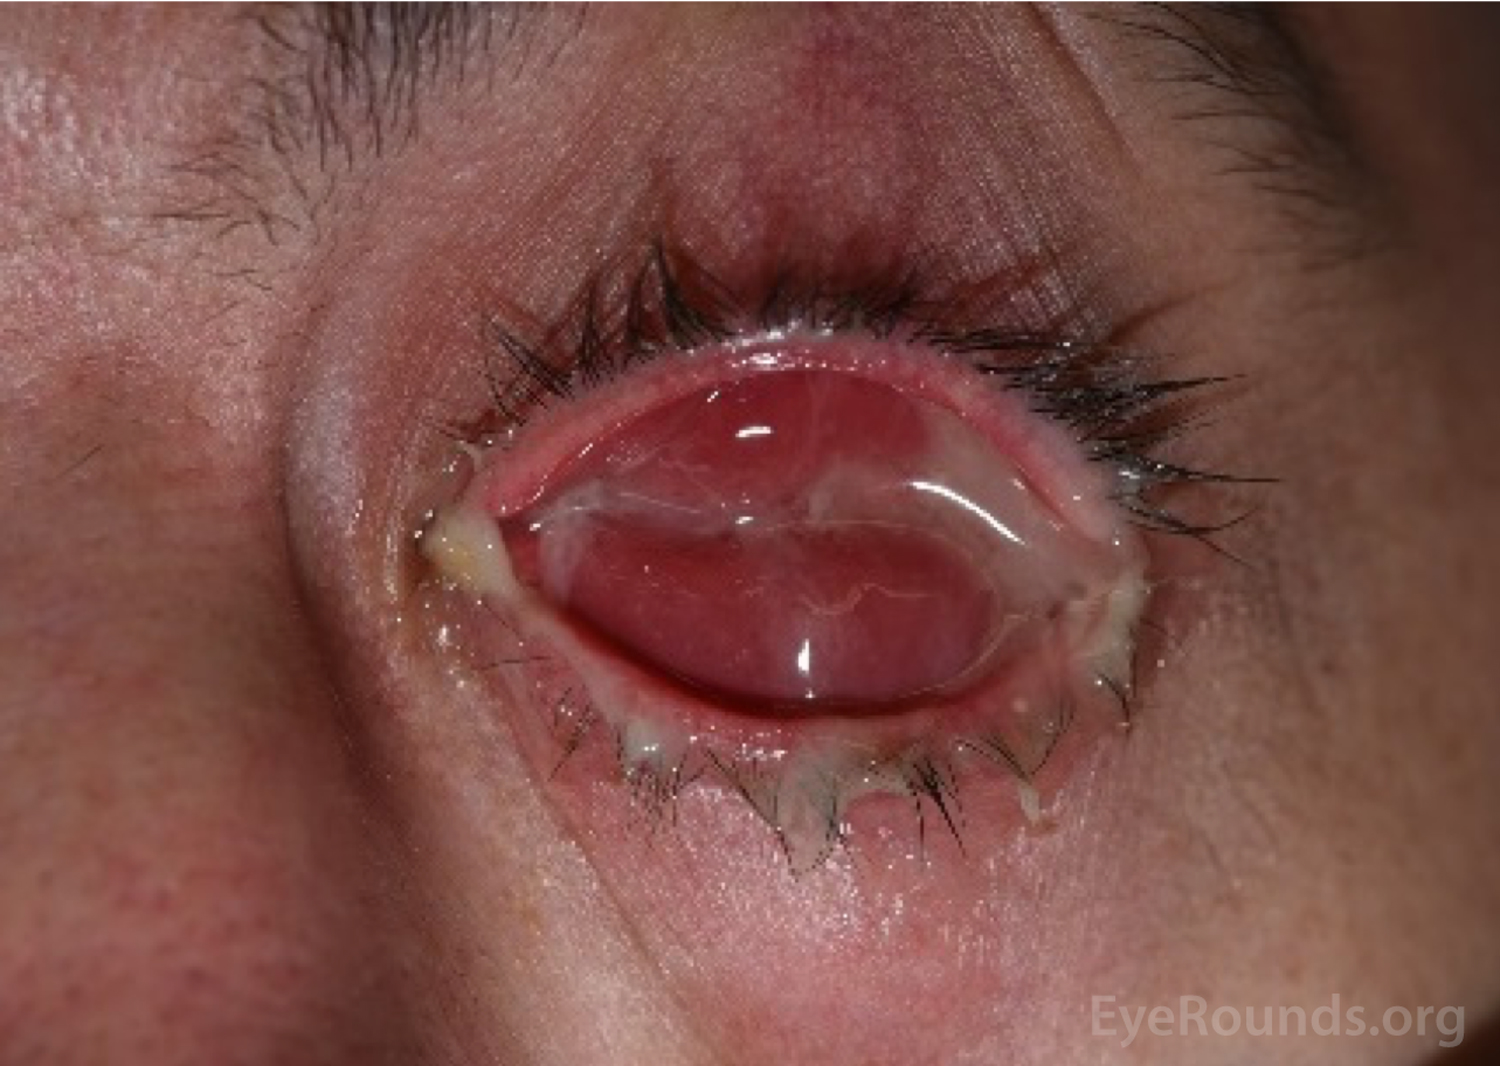 Although rare, it is possible for your eye socket to get infected or irrita...